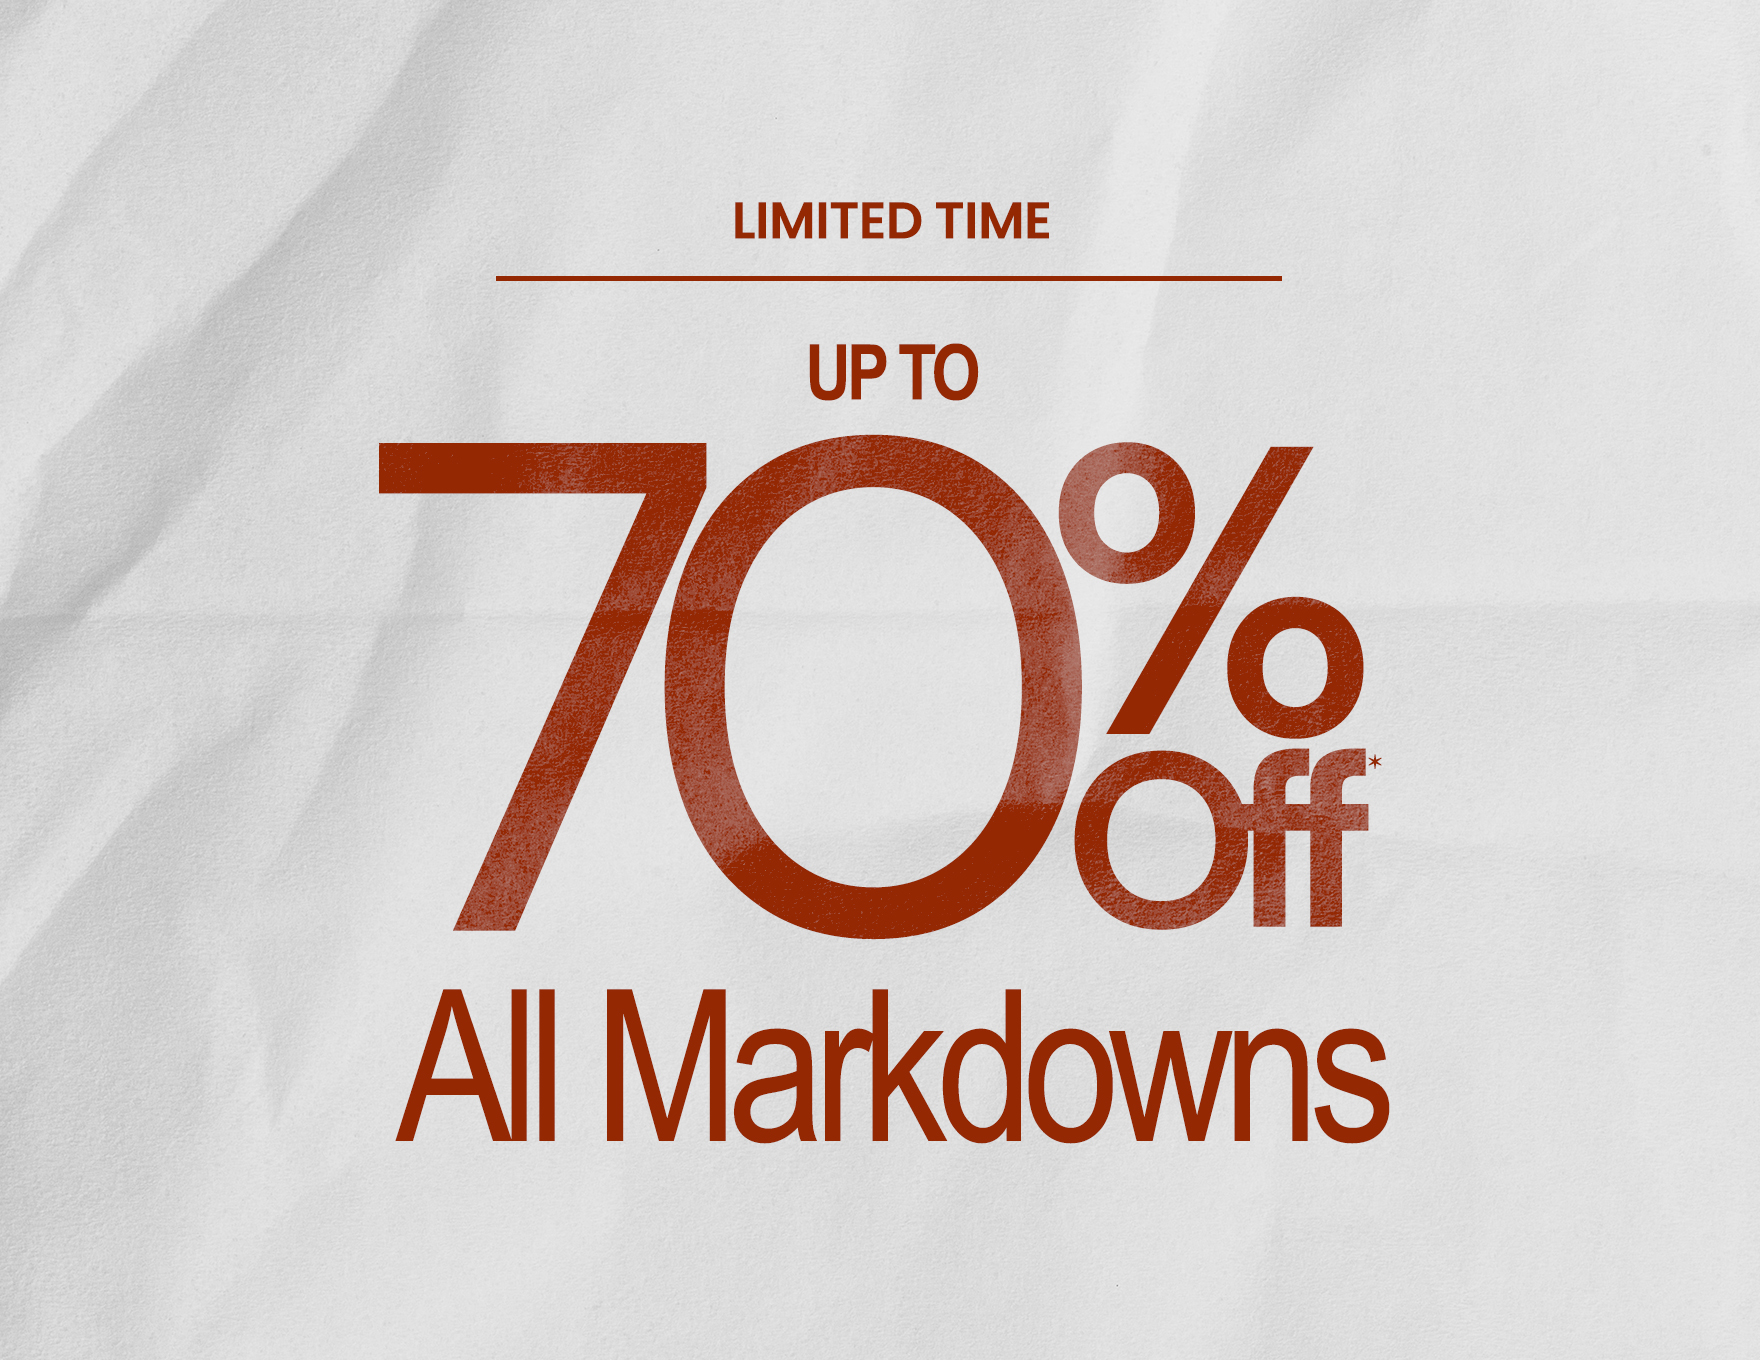 Up To 70% Off All Markdowns*